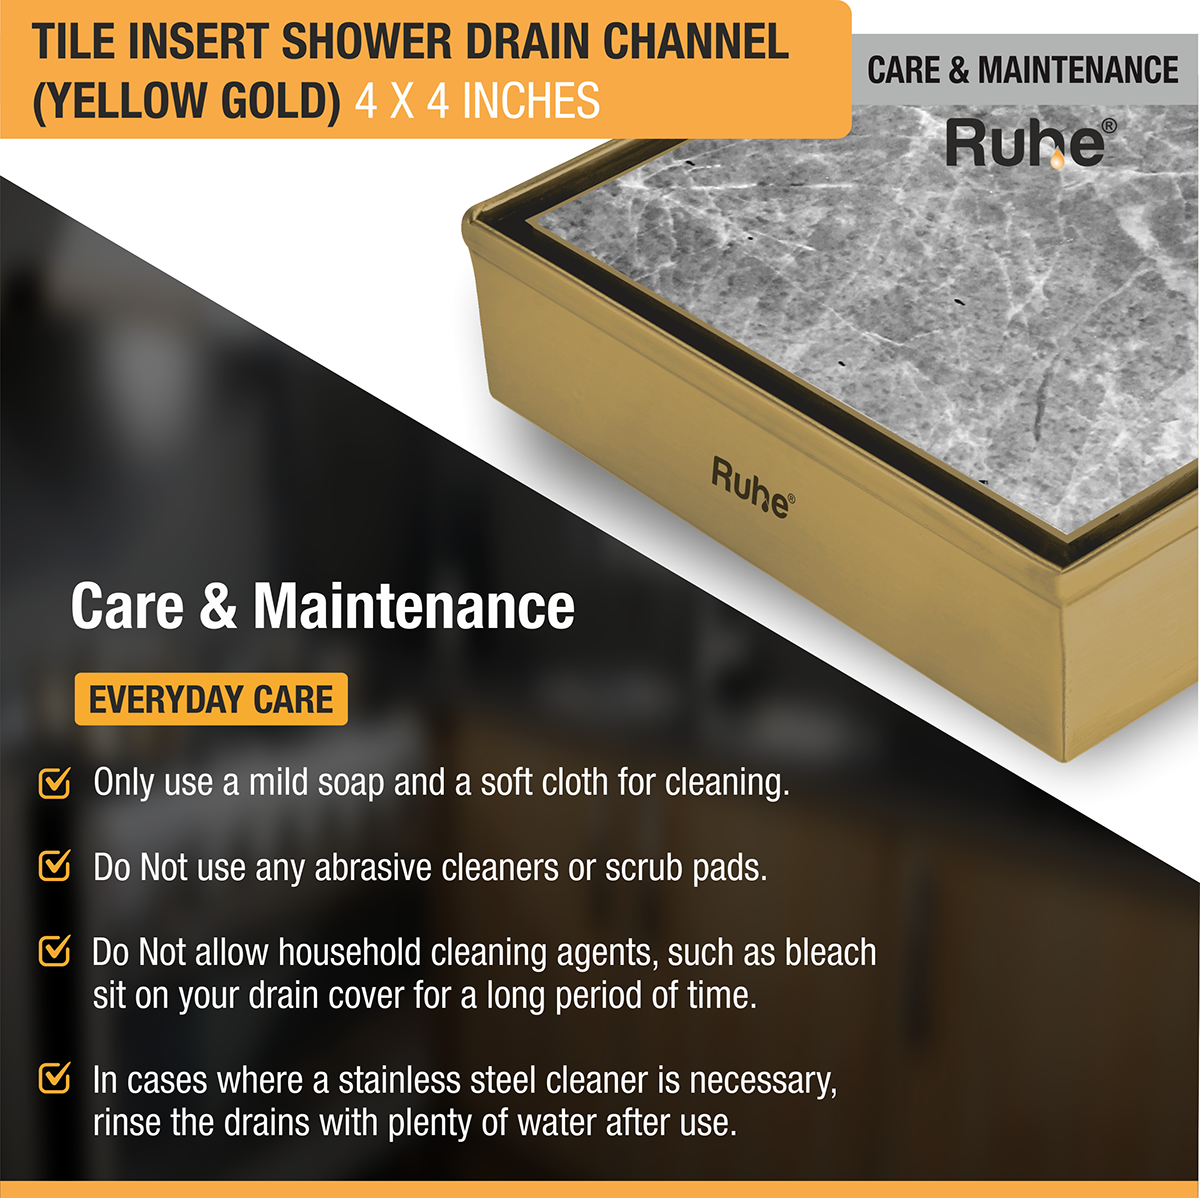 Tile Insert Shower Drain Channel (4 x 4 Inches) YELLOW GOLD PVD Coated - by Ruhe®